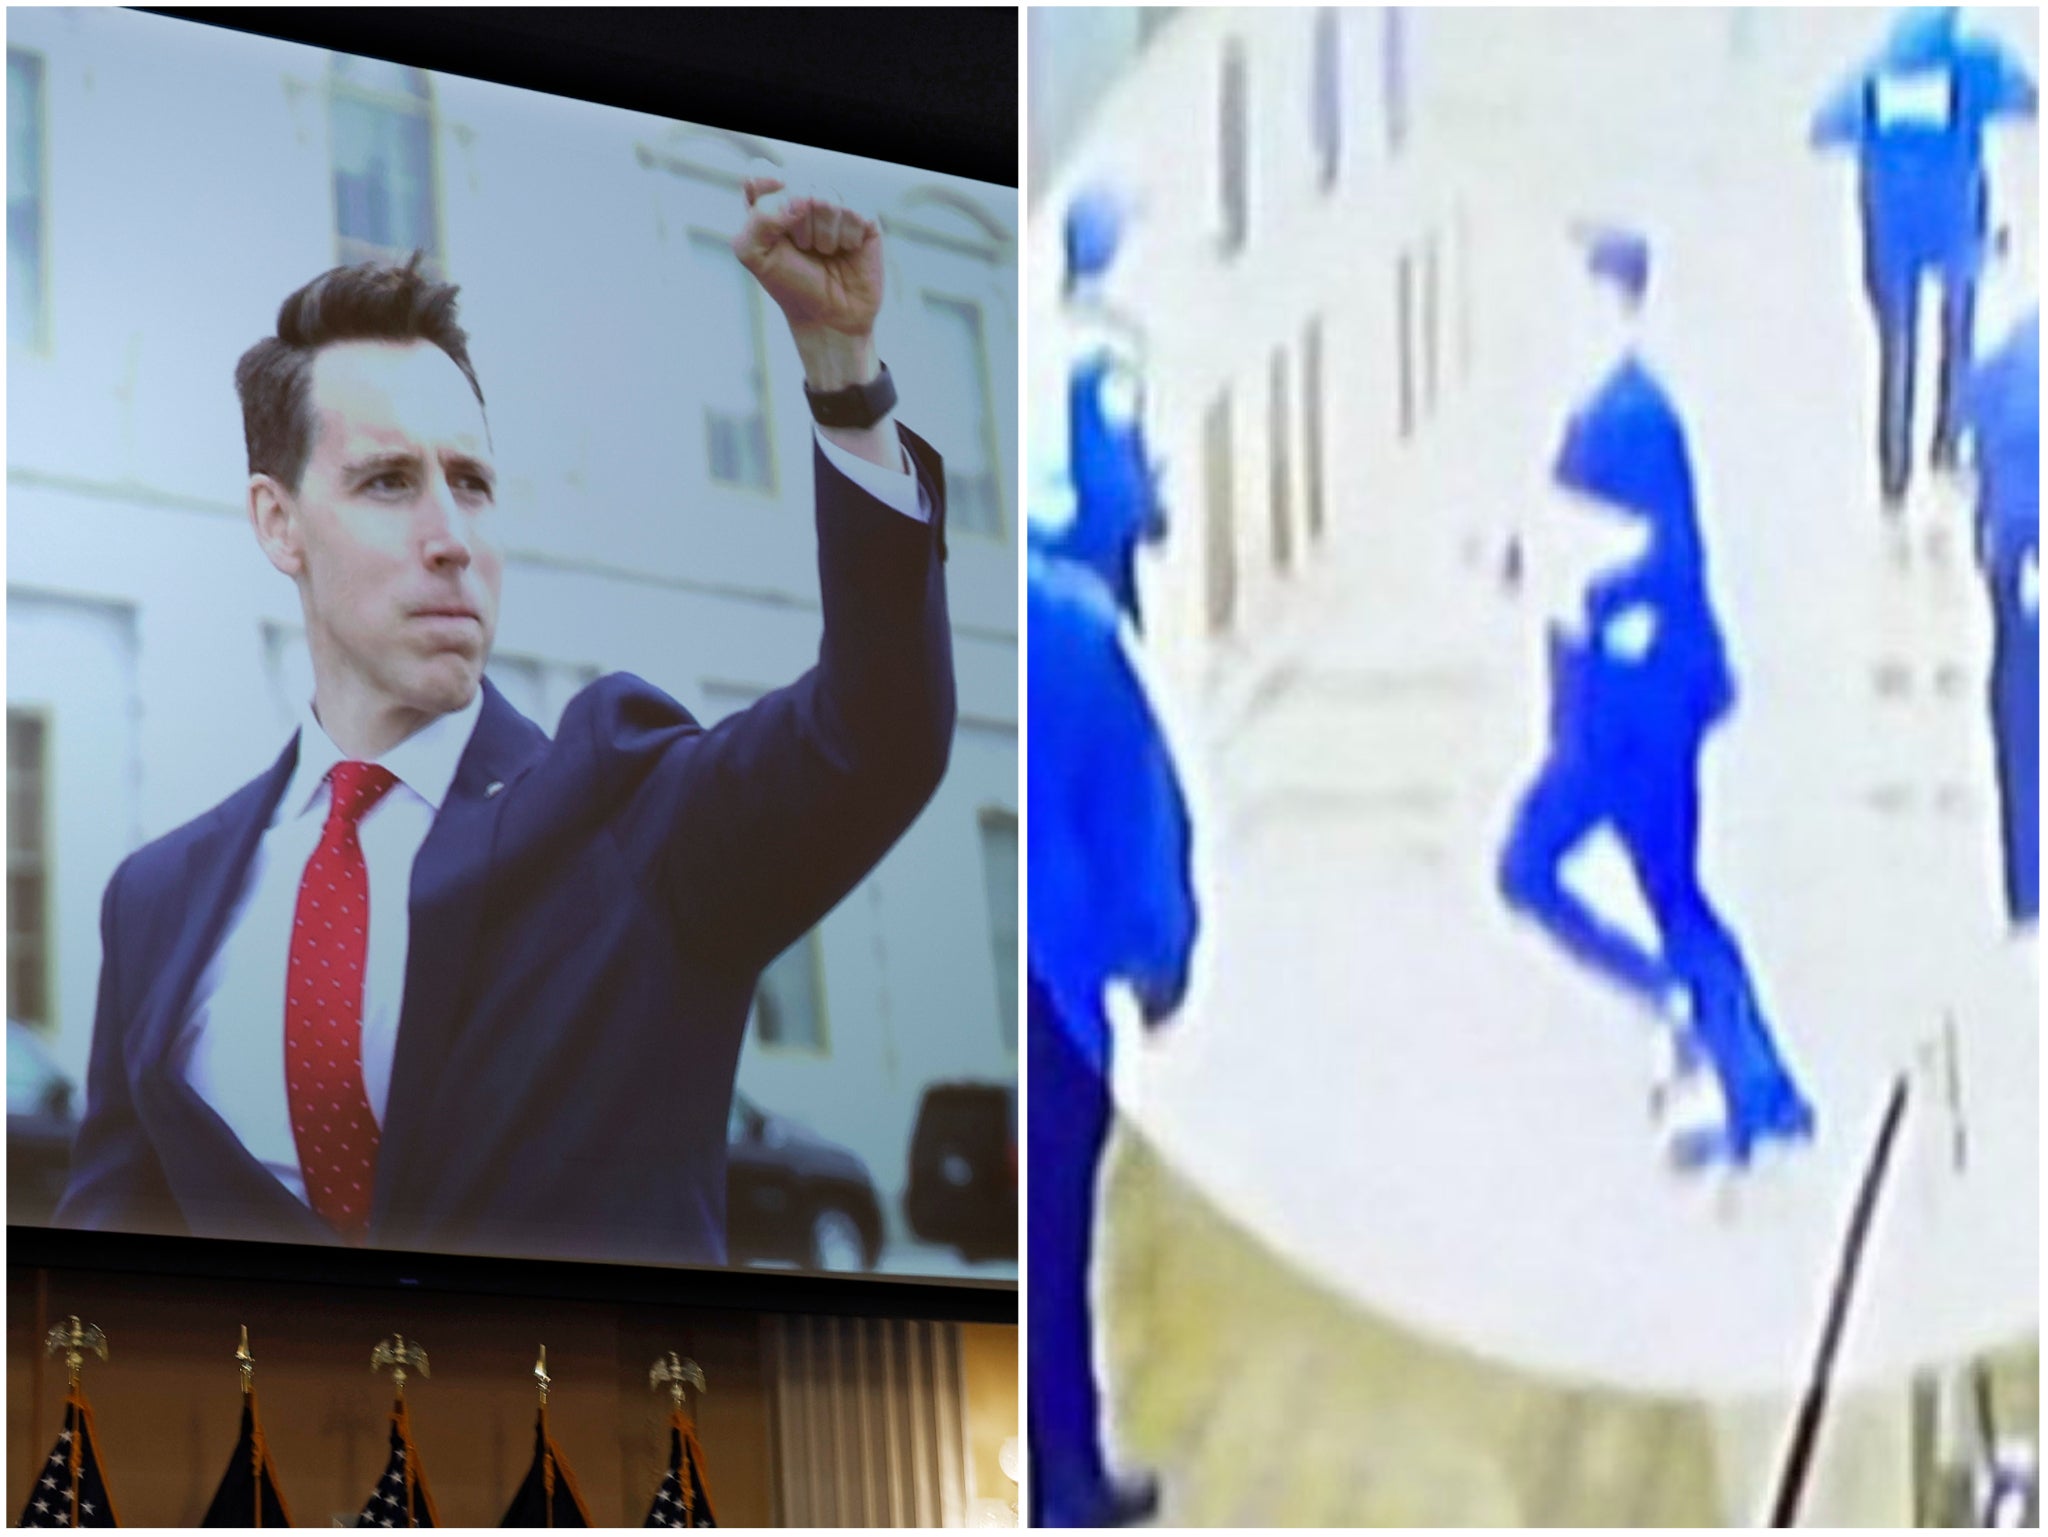 Josh Hawley raised his fist in support of the rioters he would later be forced to flee as they lay siege to the US Capitol on January 6 2021